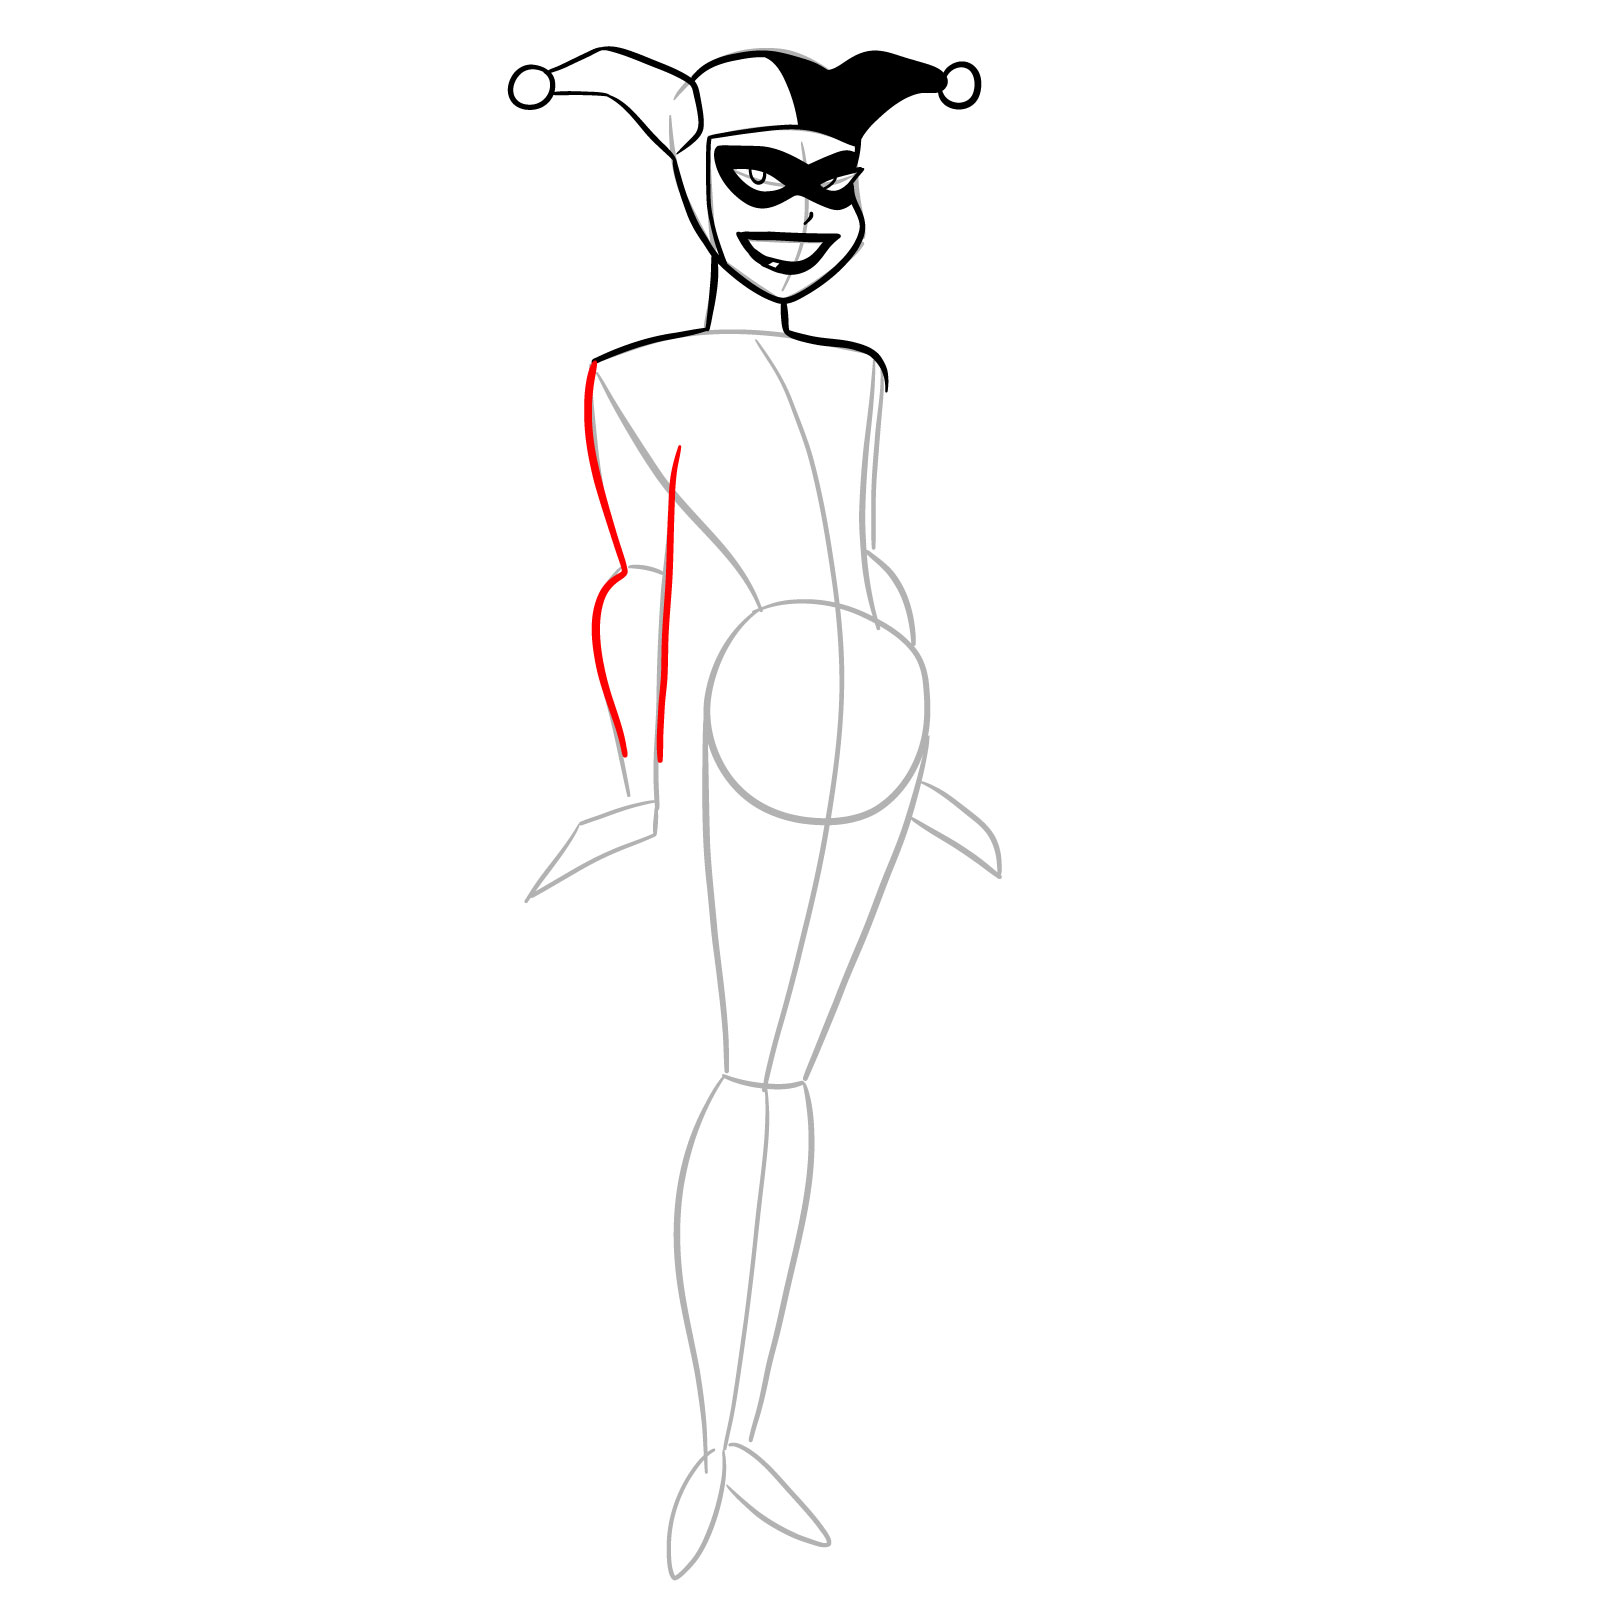 How to draw Harley Quinn in a classic suit - step 12